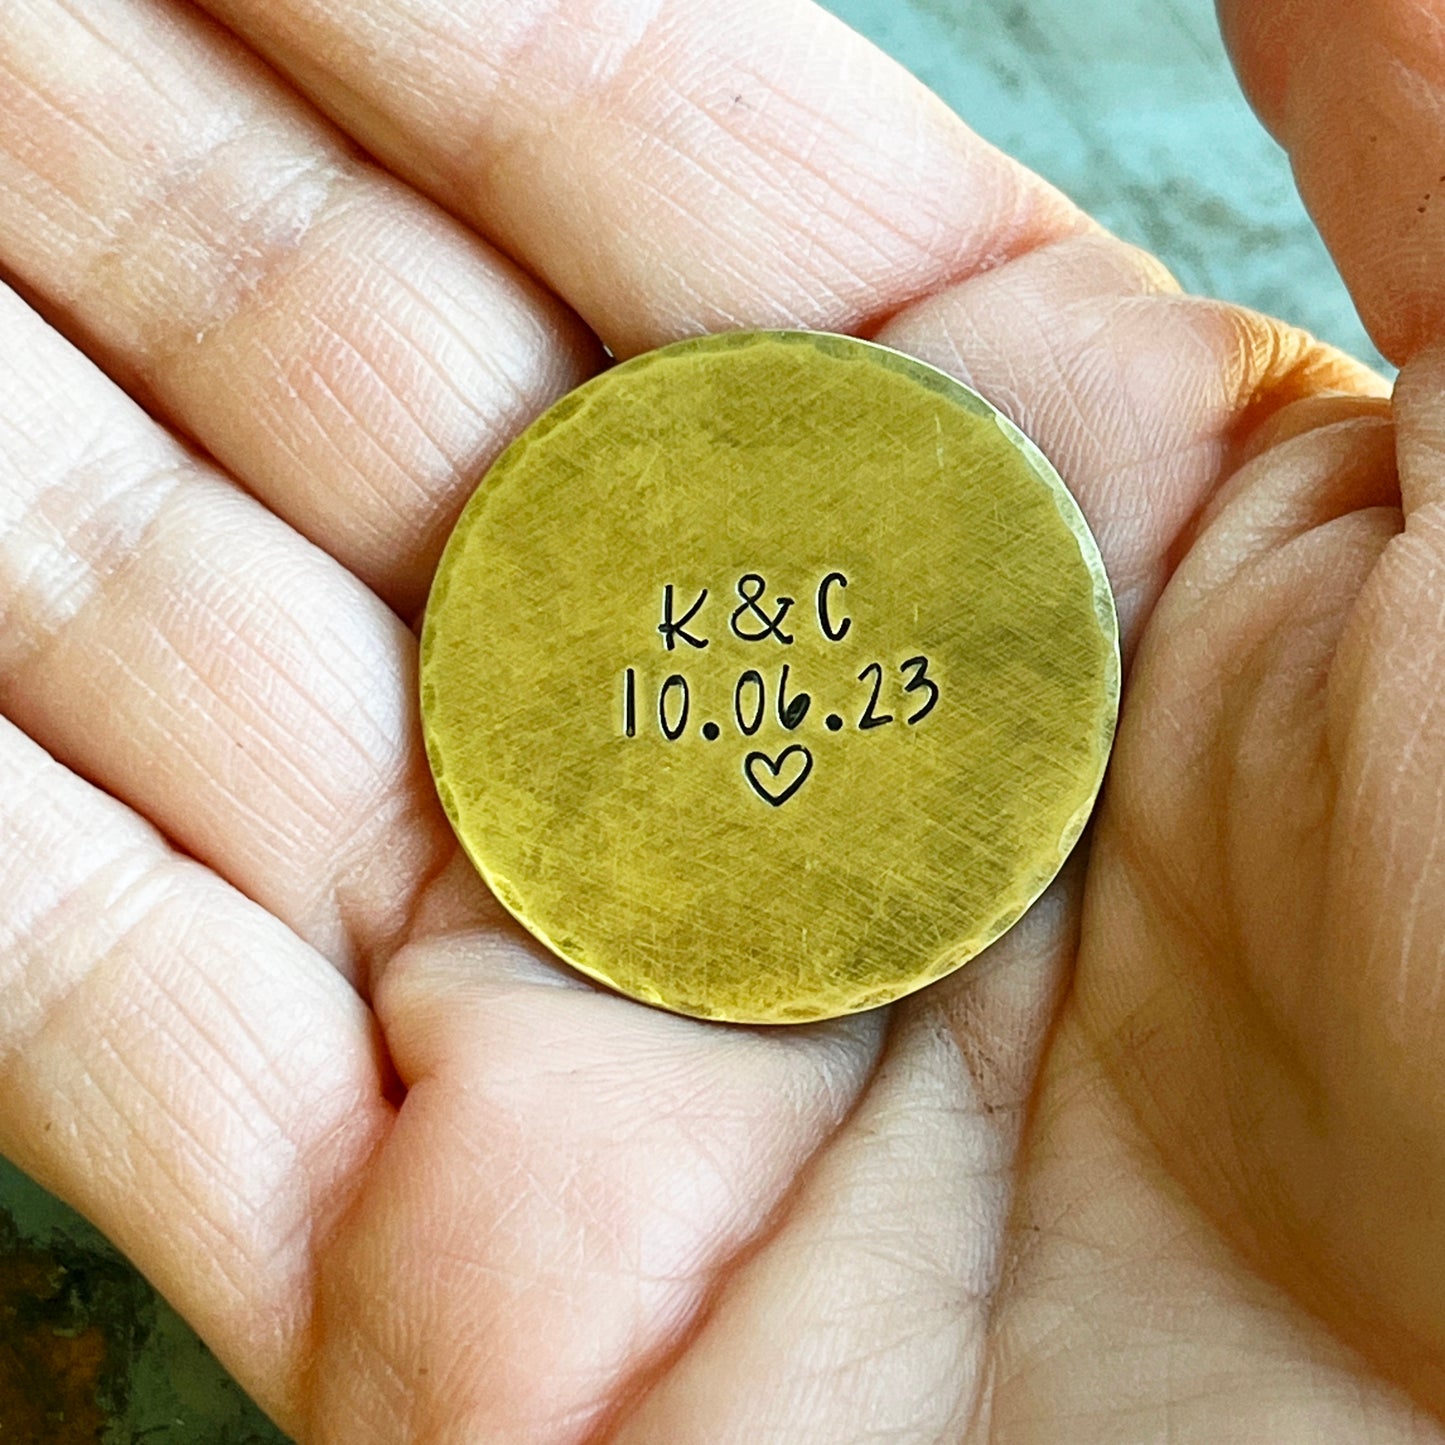 Wedding Day Gift, Solid Brass Pocket Coin with Initials and Date